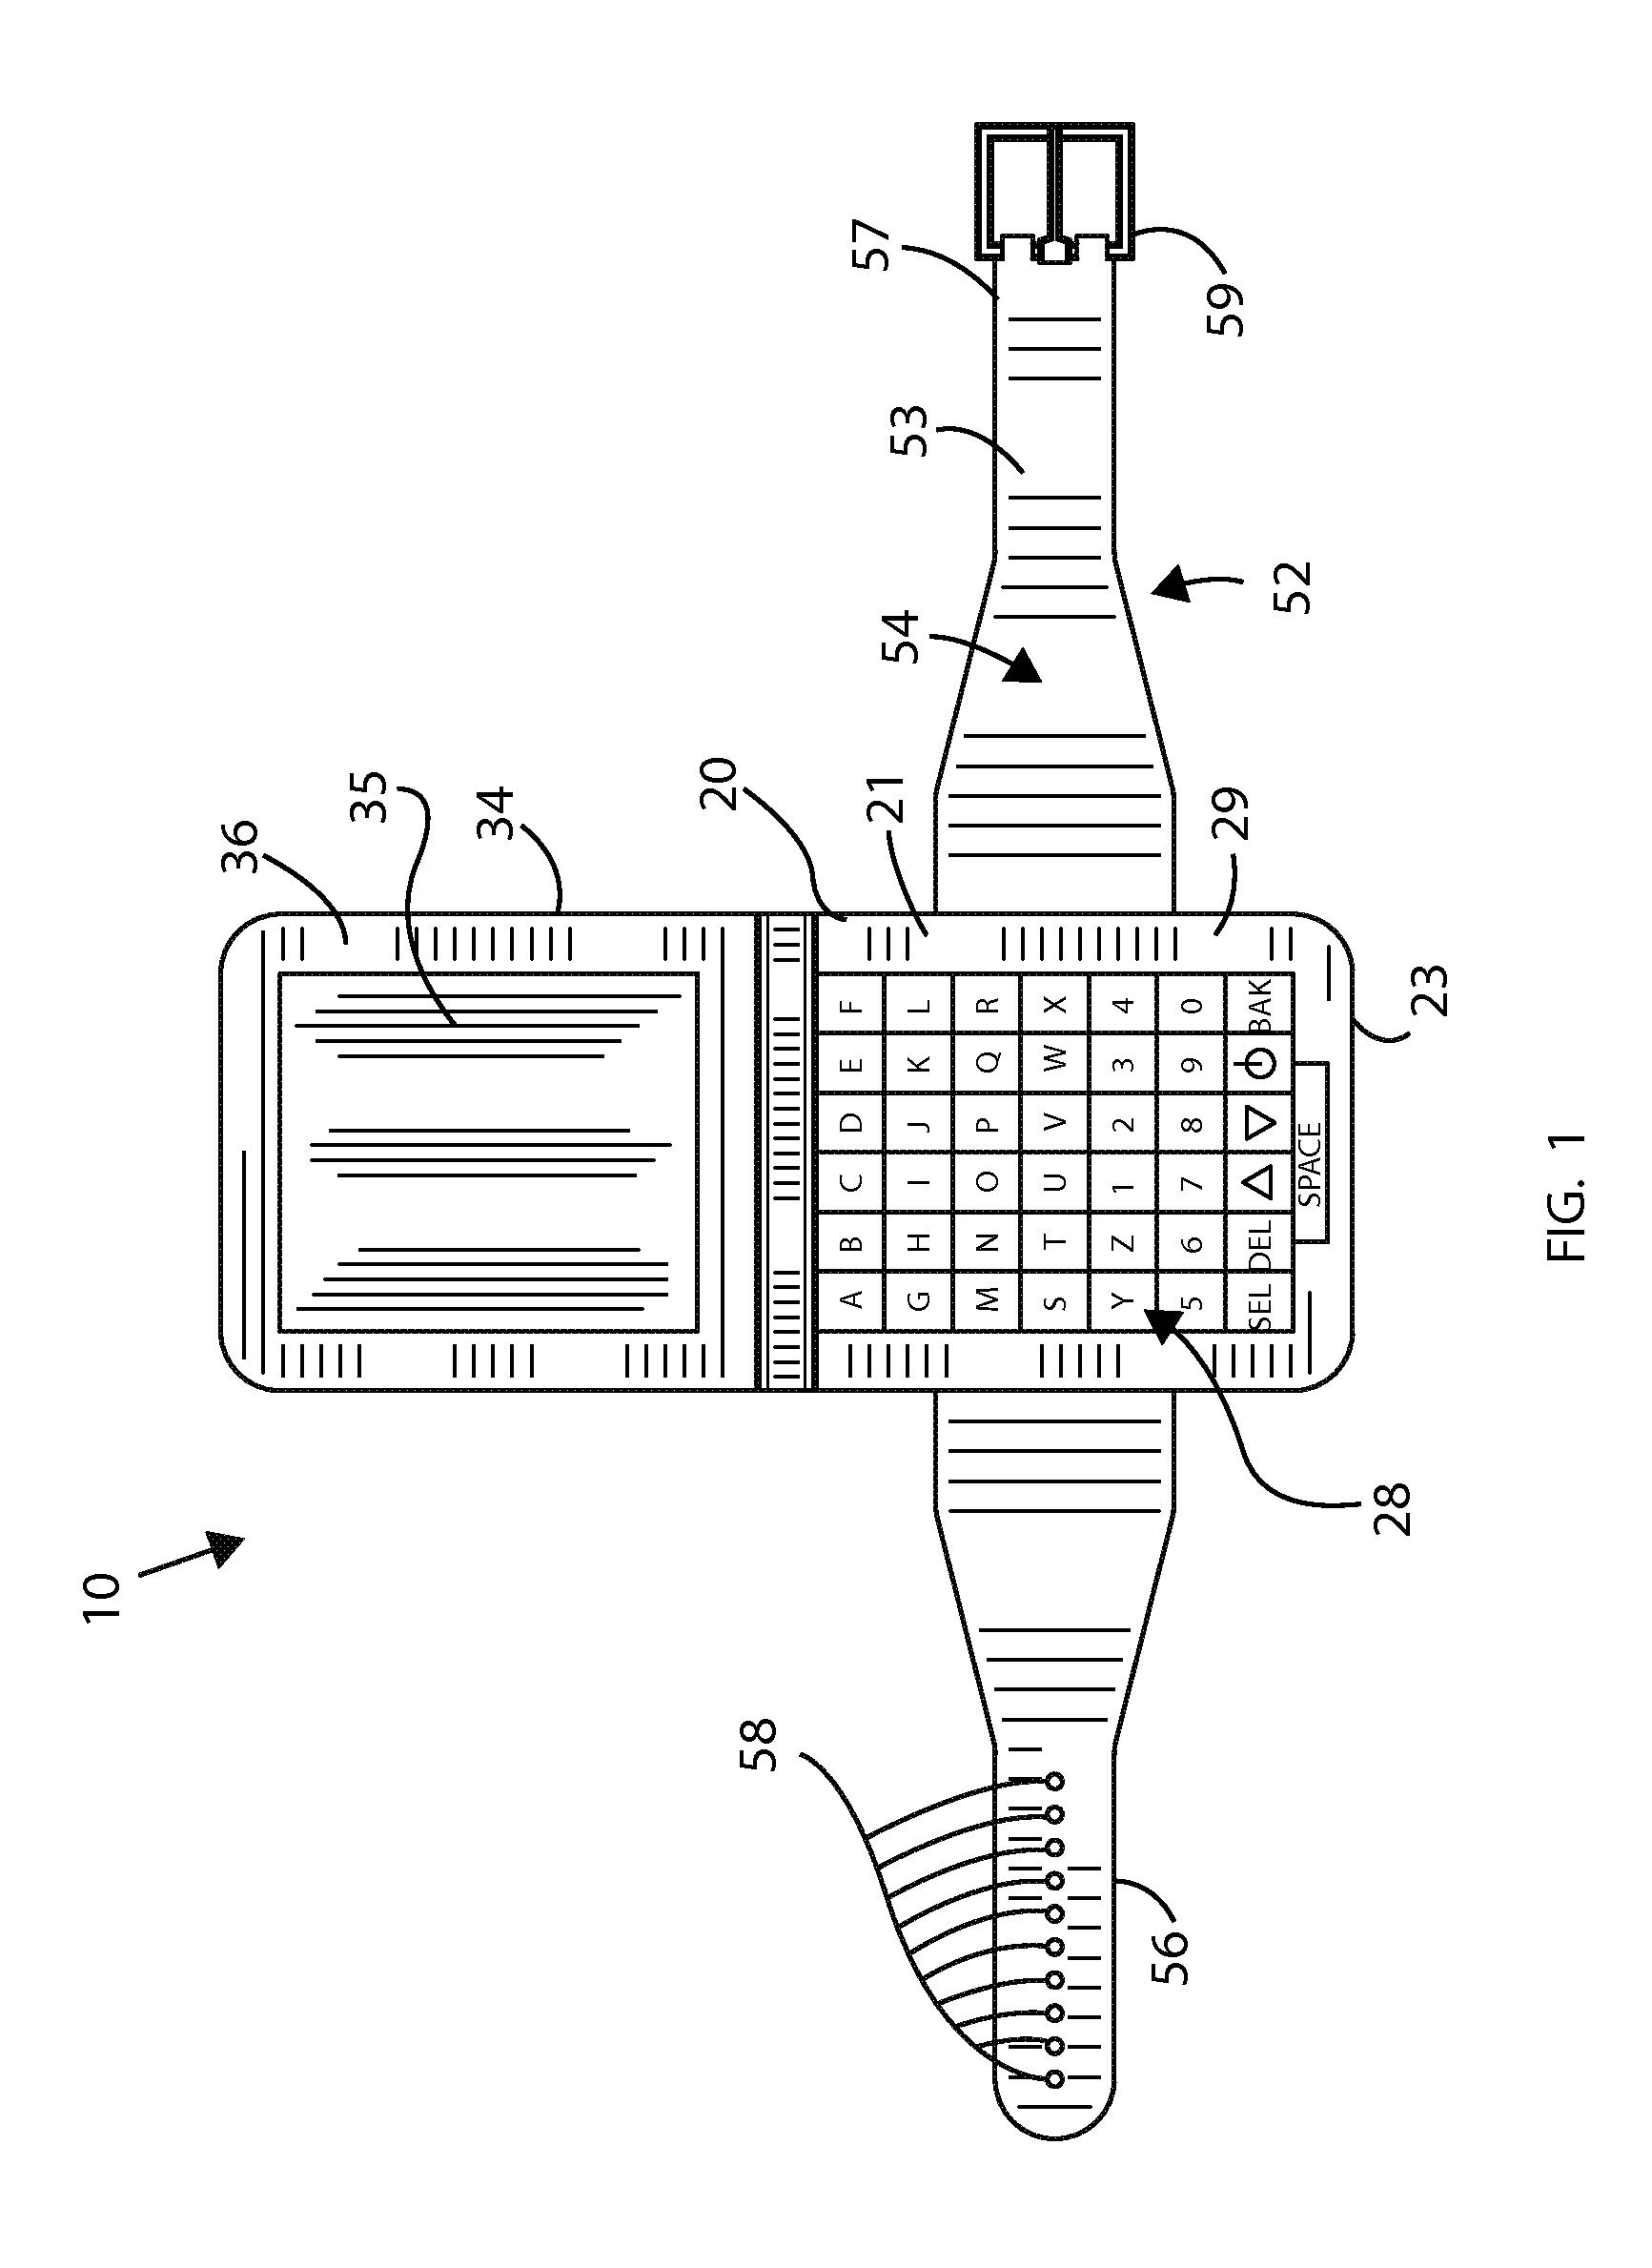 Wireless radio and headphones system and associated method